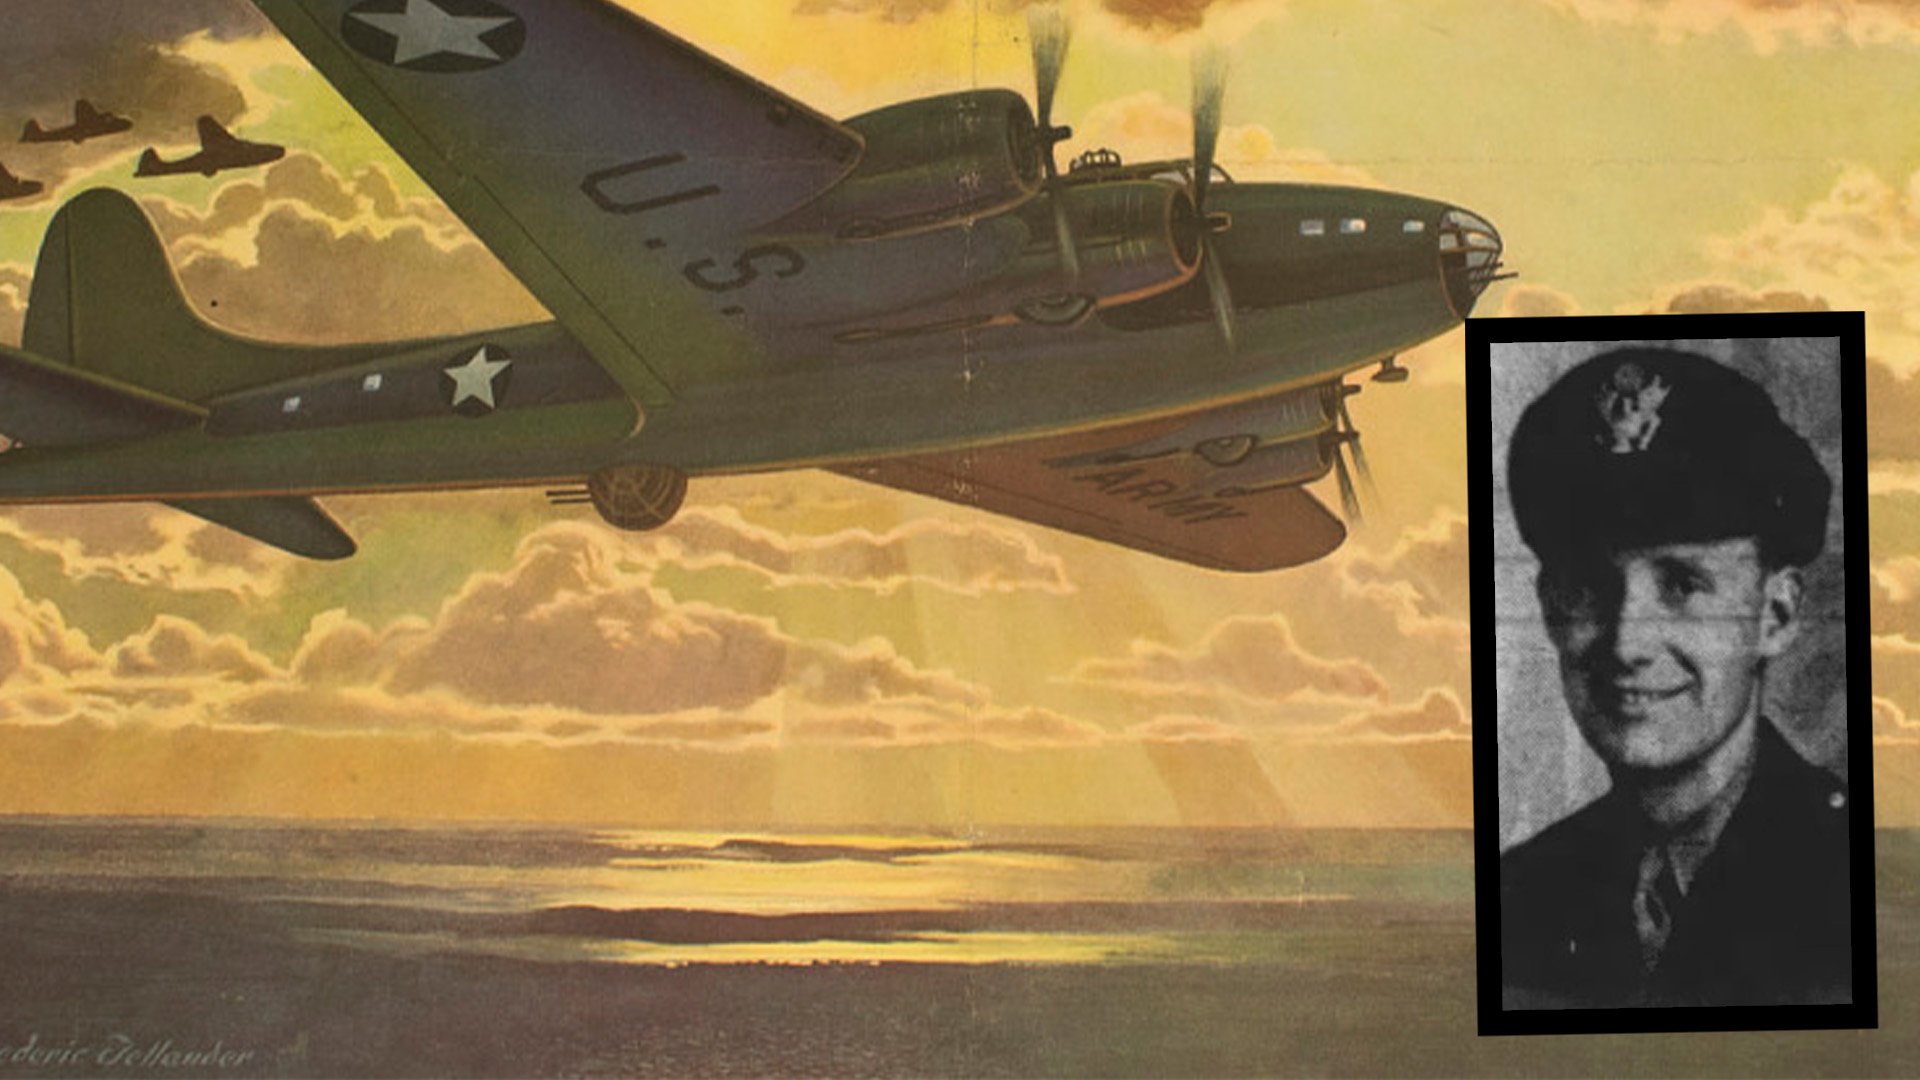 German Luftwaffe fighters shot down his B-17G Flying Fortress in 1944, but military officials have identified the remains of 1st Lt. Carl D. Nesbitt and he's slated to be buried in Pennsylvania on May 15, 2023, in Pennsylvania. Composite by Coffee or Die Magazine.